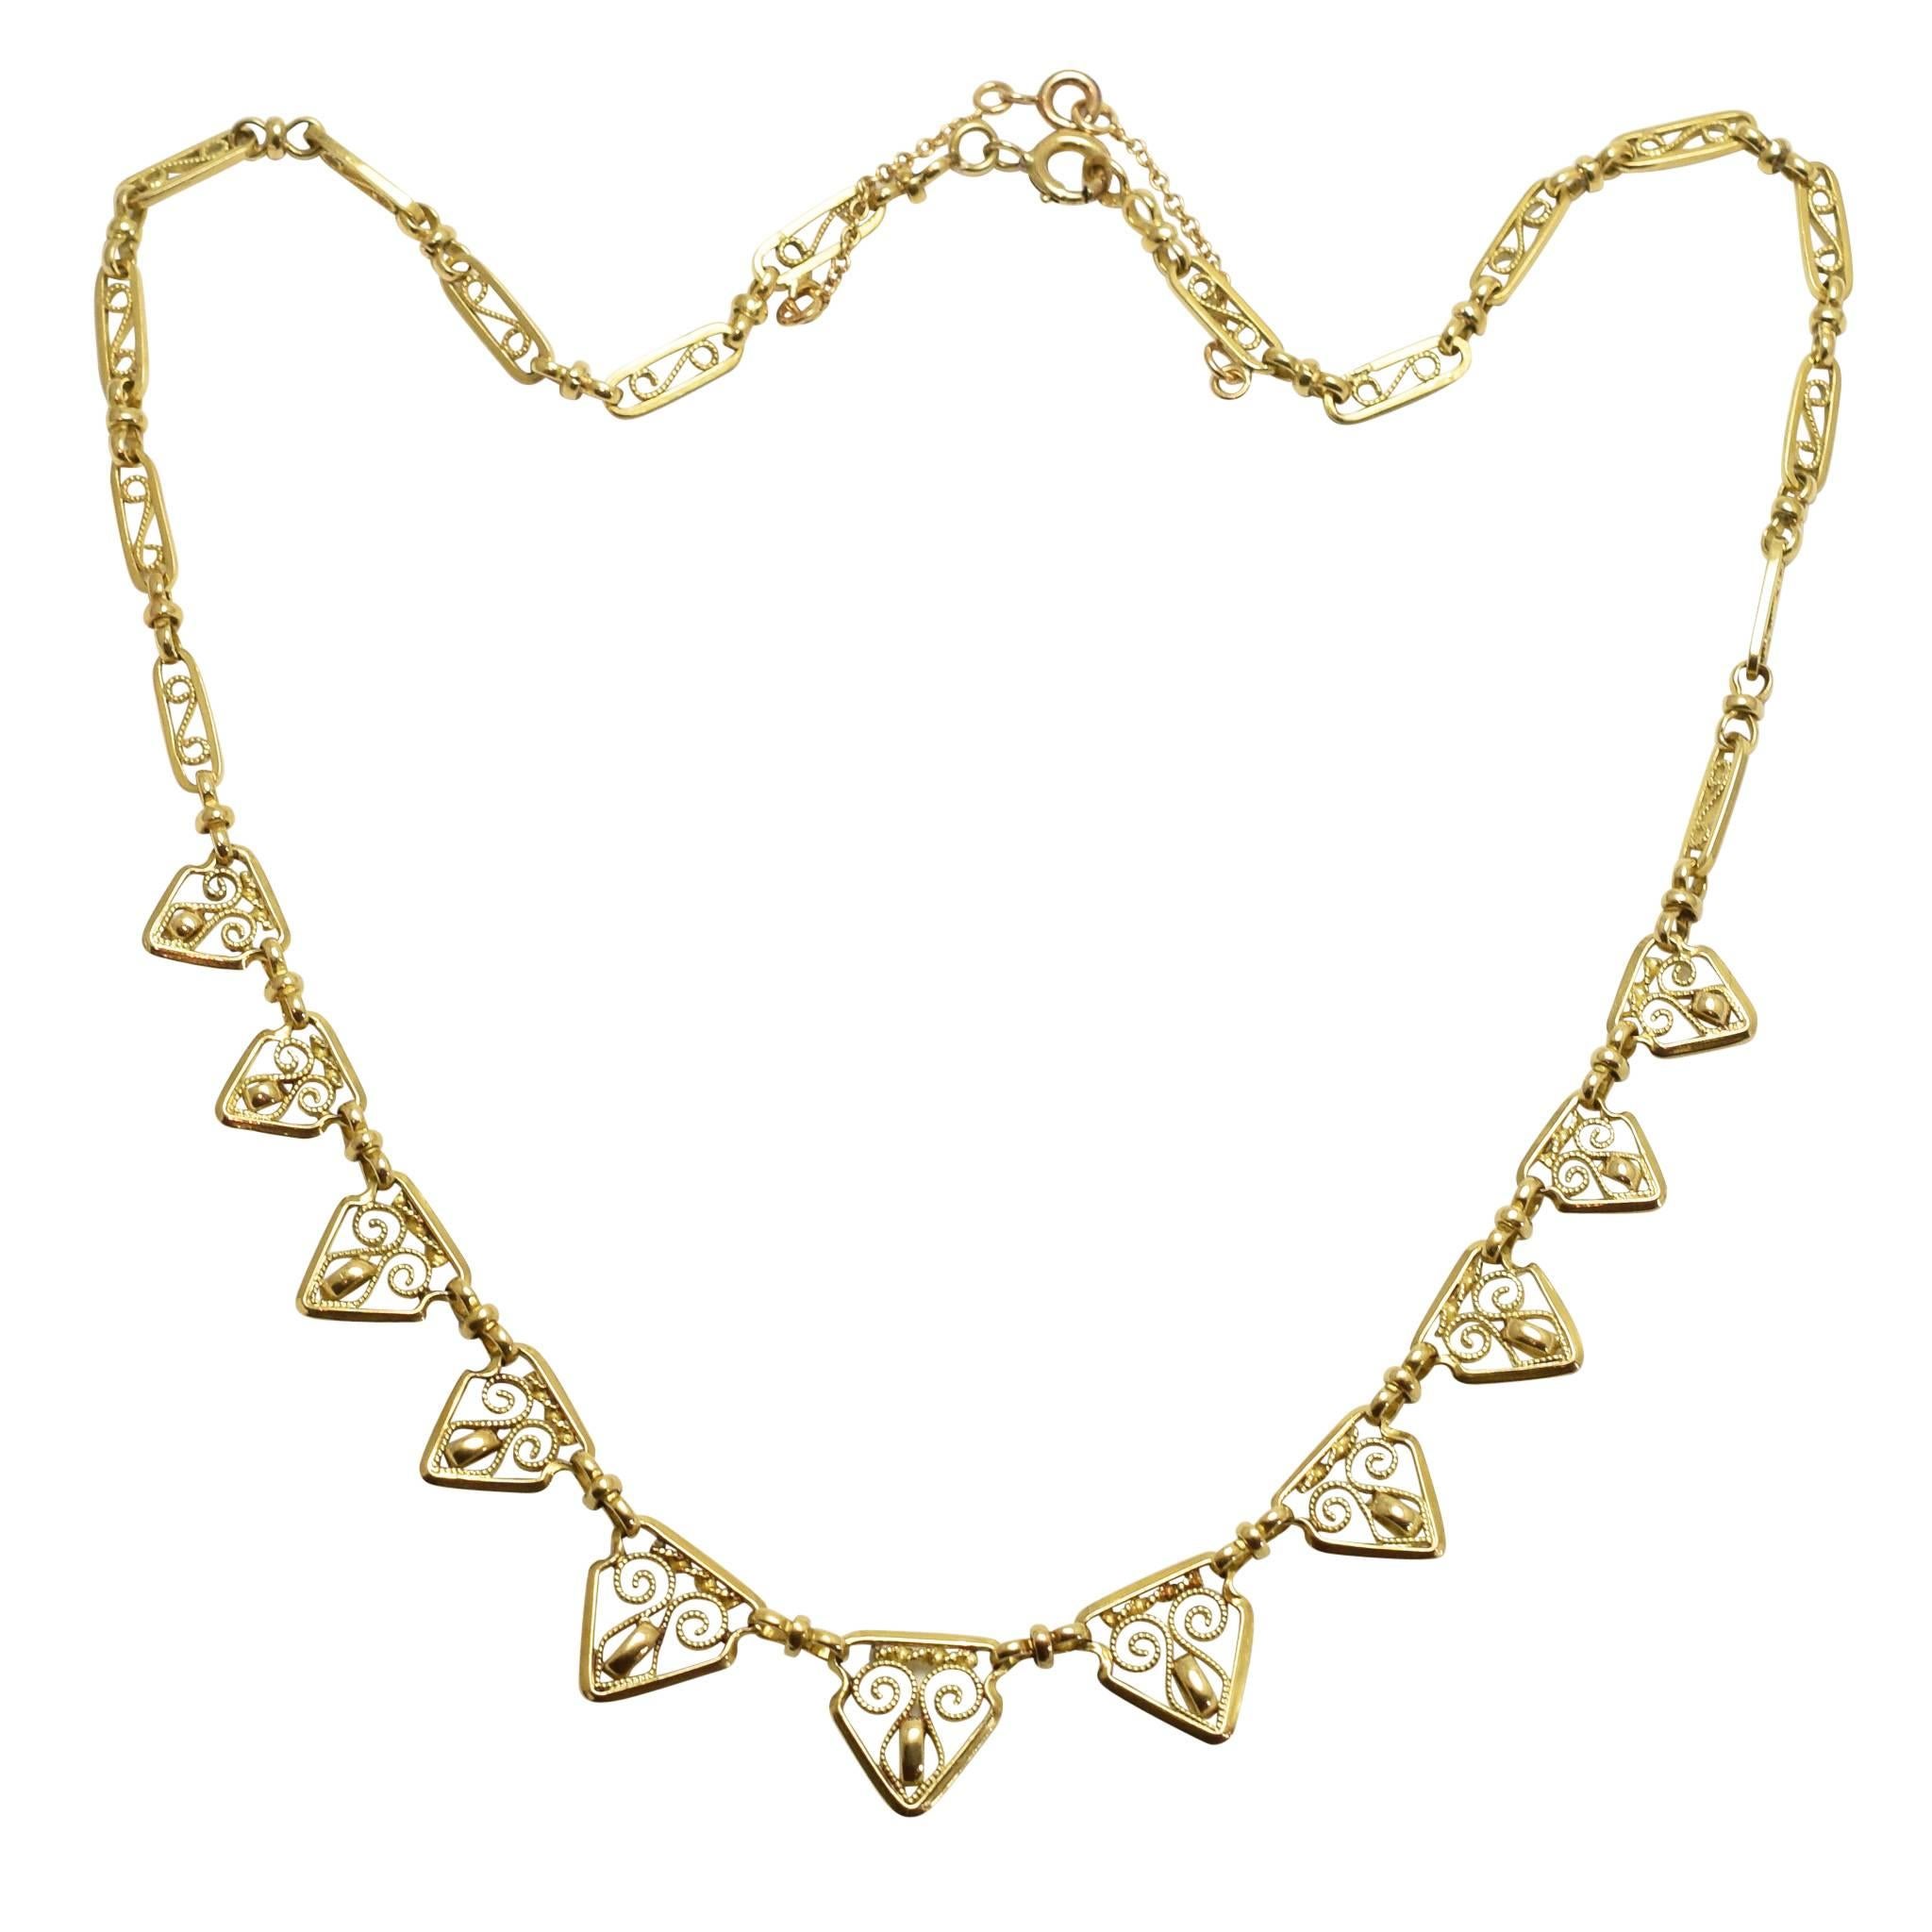 Antique French Openwork Gold Necklace